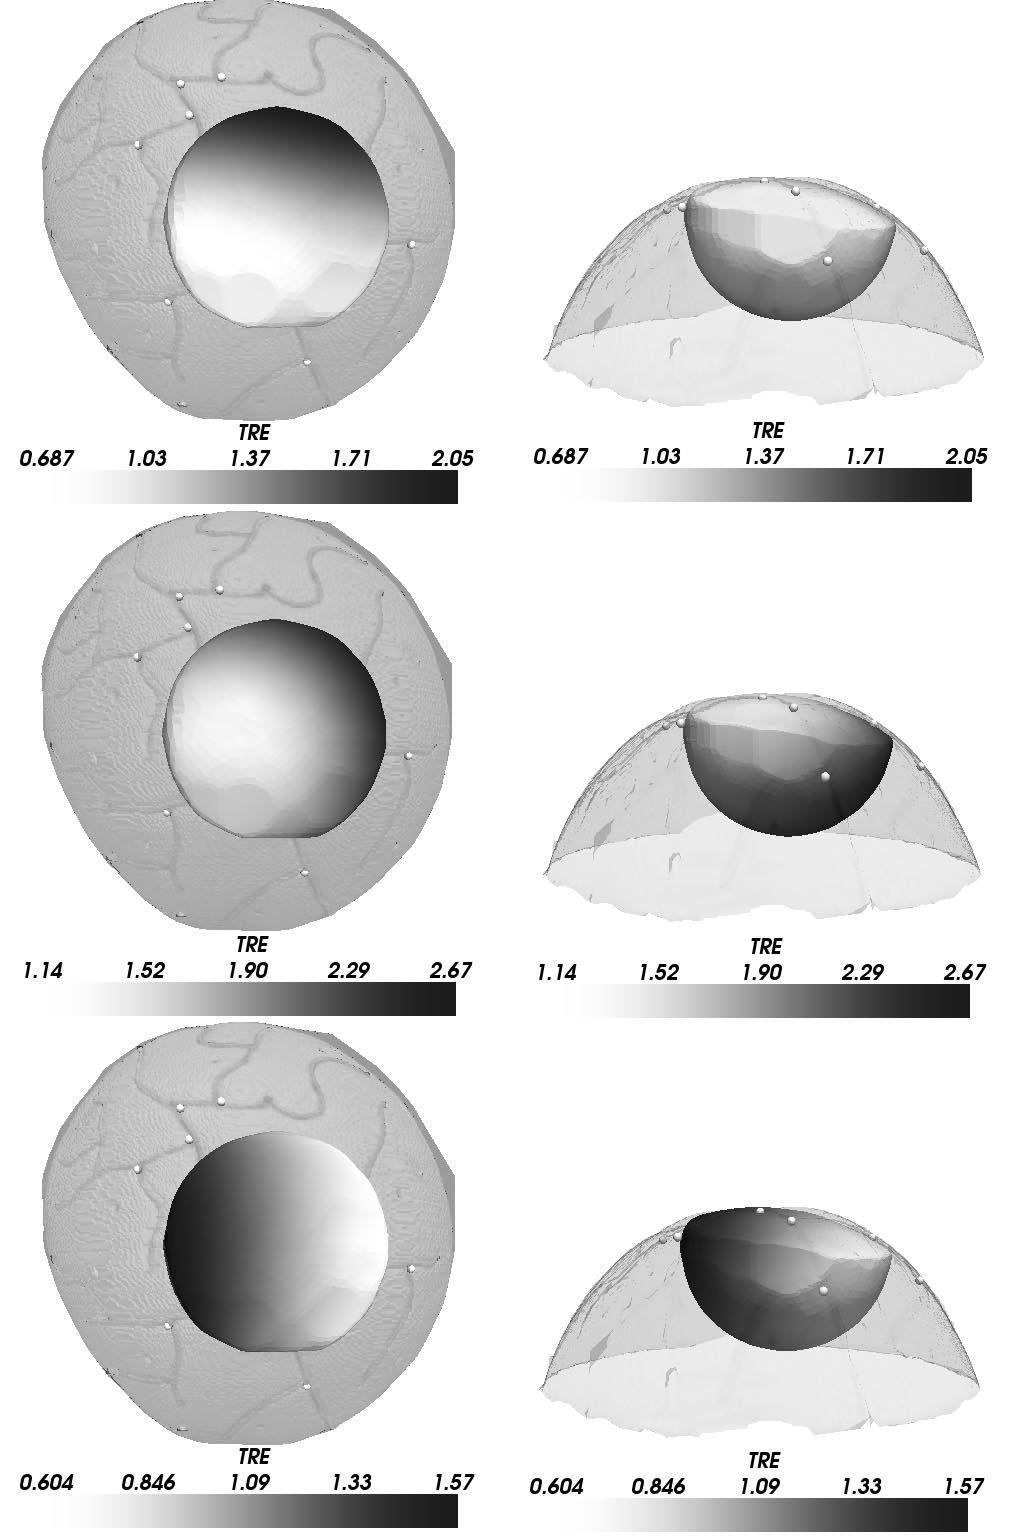 MIGA et al.: CORTICAL SURFACE REGISTRATION FOR IMAGE-GUIDED NEUROSURGERY USING LASER-RANGE SCANNING 981 Fig. 9. Three-dimensional distribution of TRE for deep tissue targets.